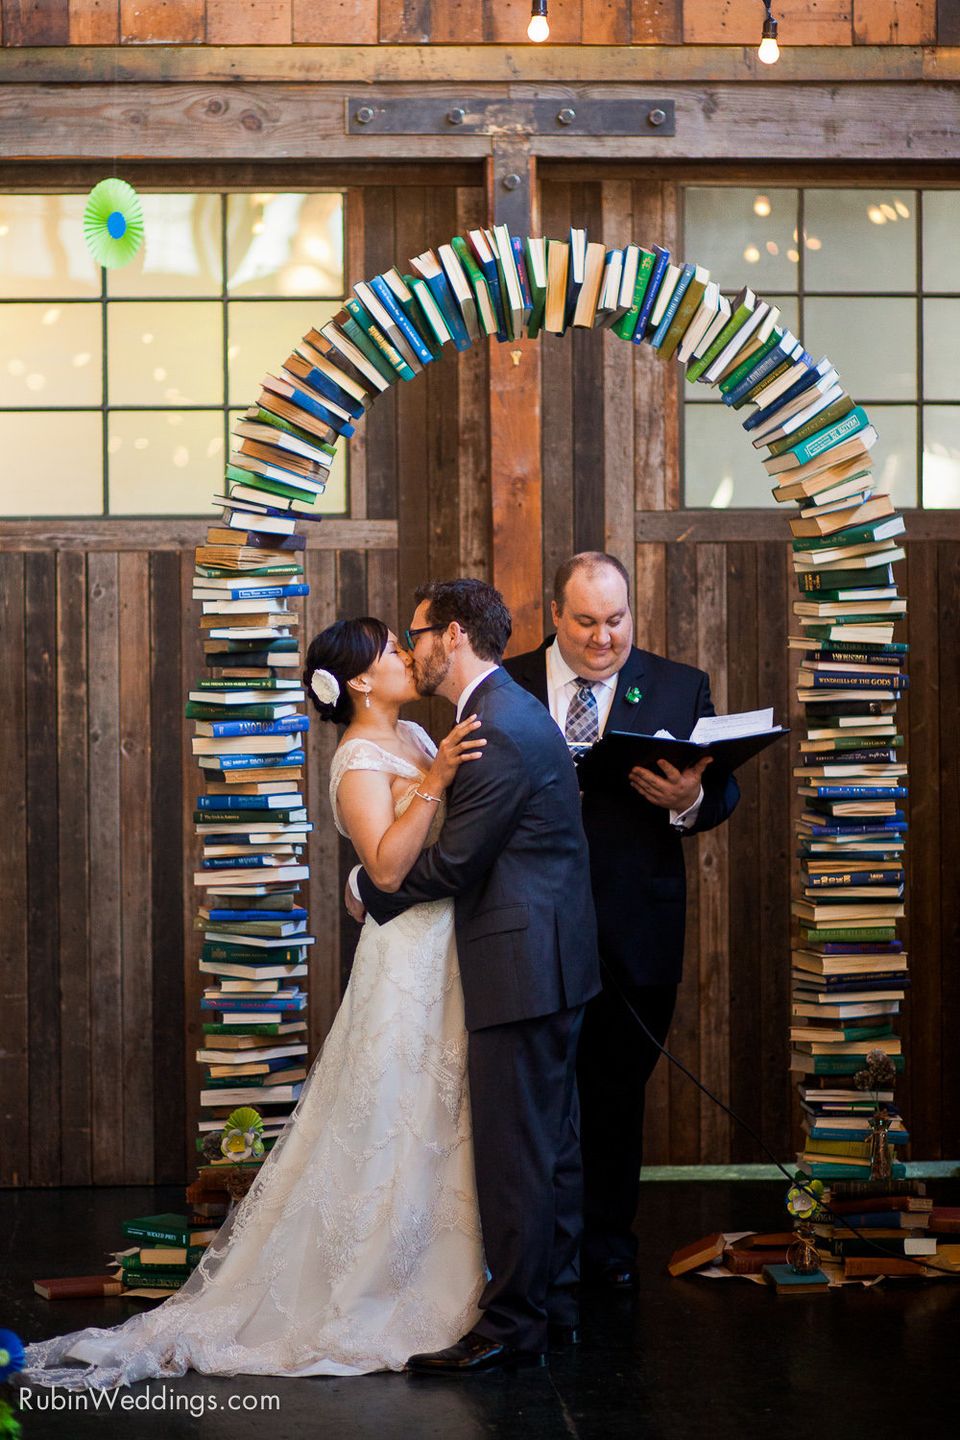 A book arch for the ceremony